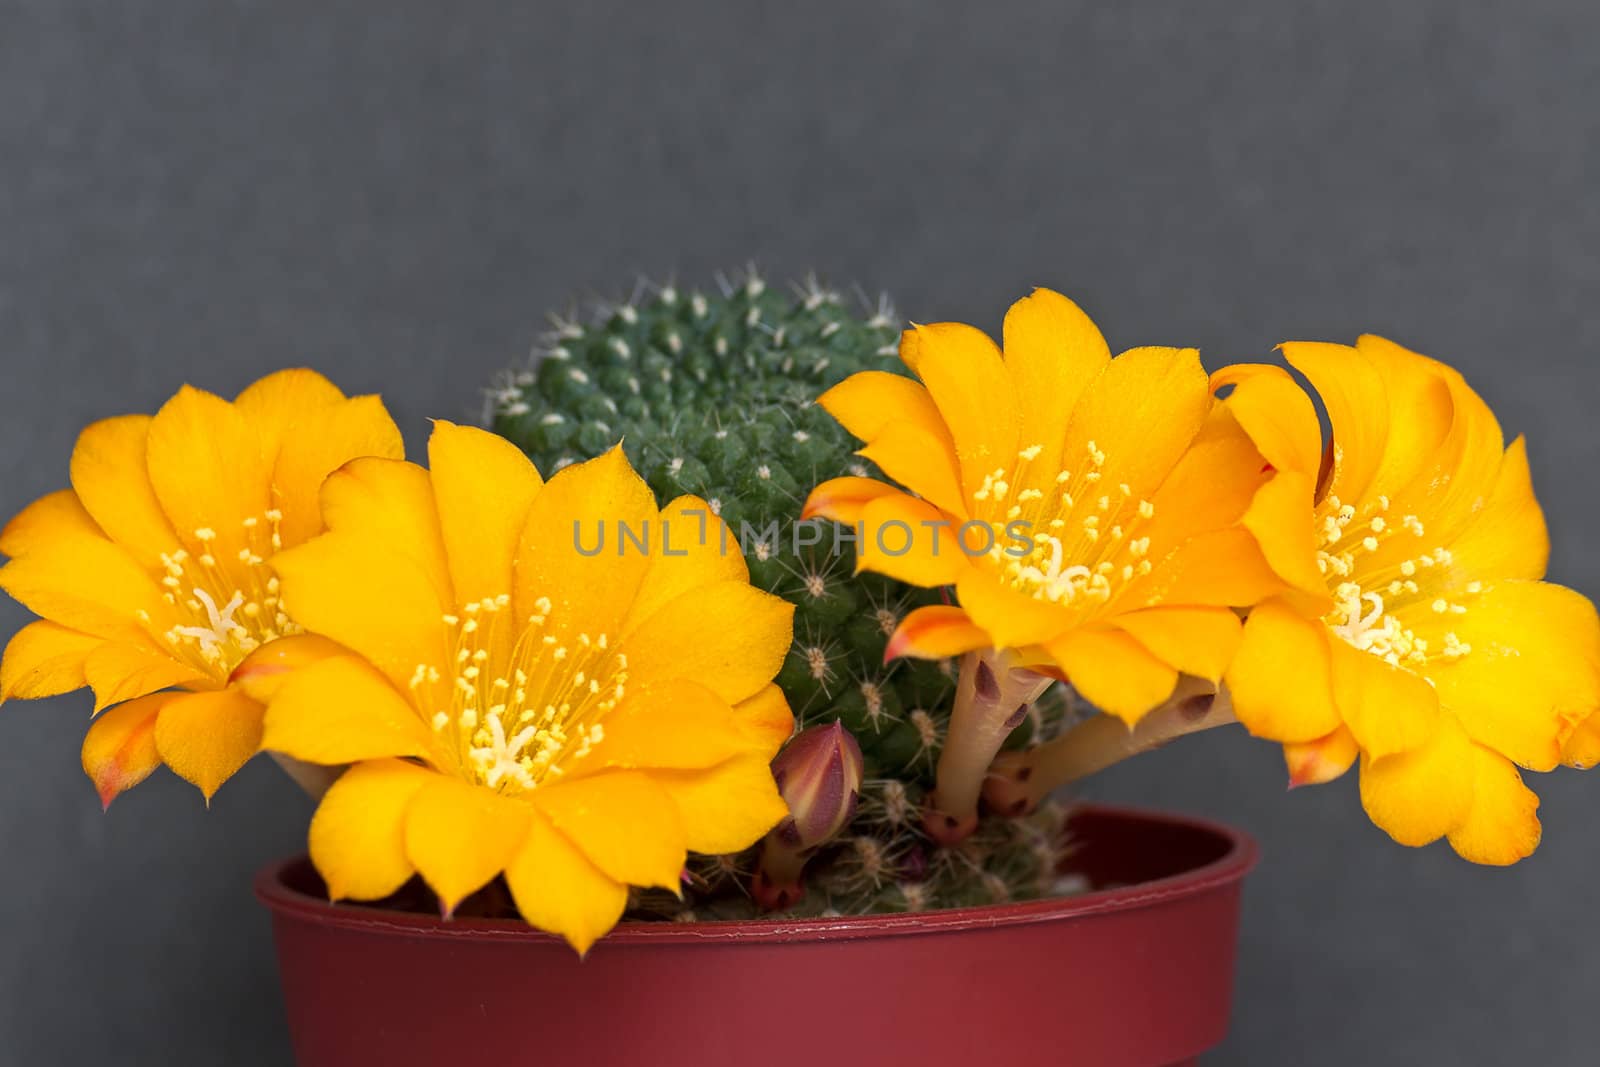 Cactus with flowers  on dark  background (Rebutia).Image with shallow depth of field.